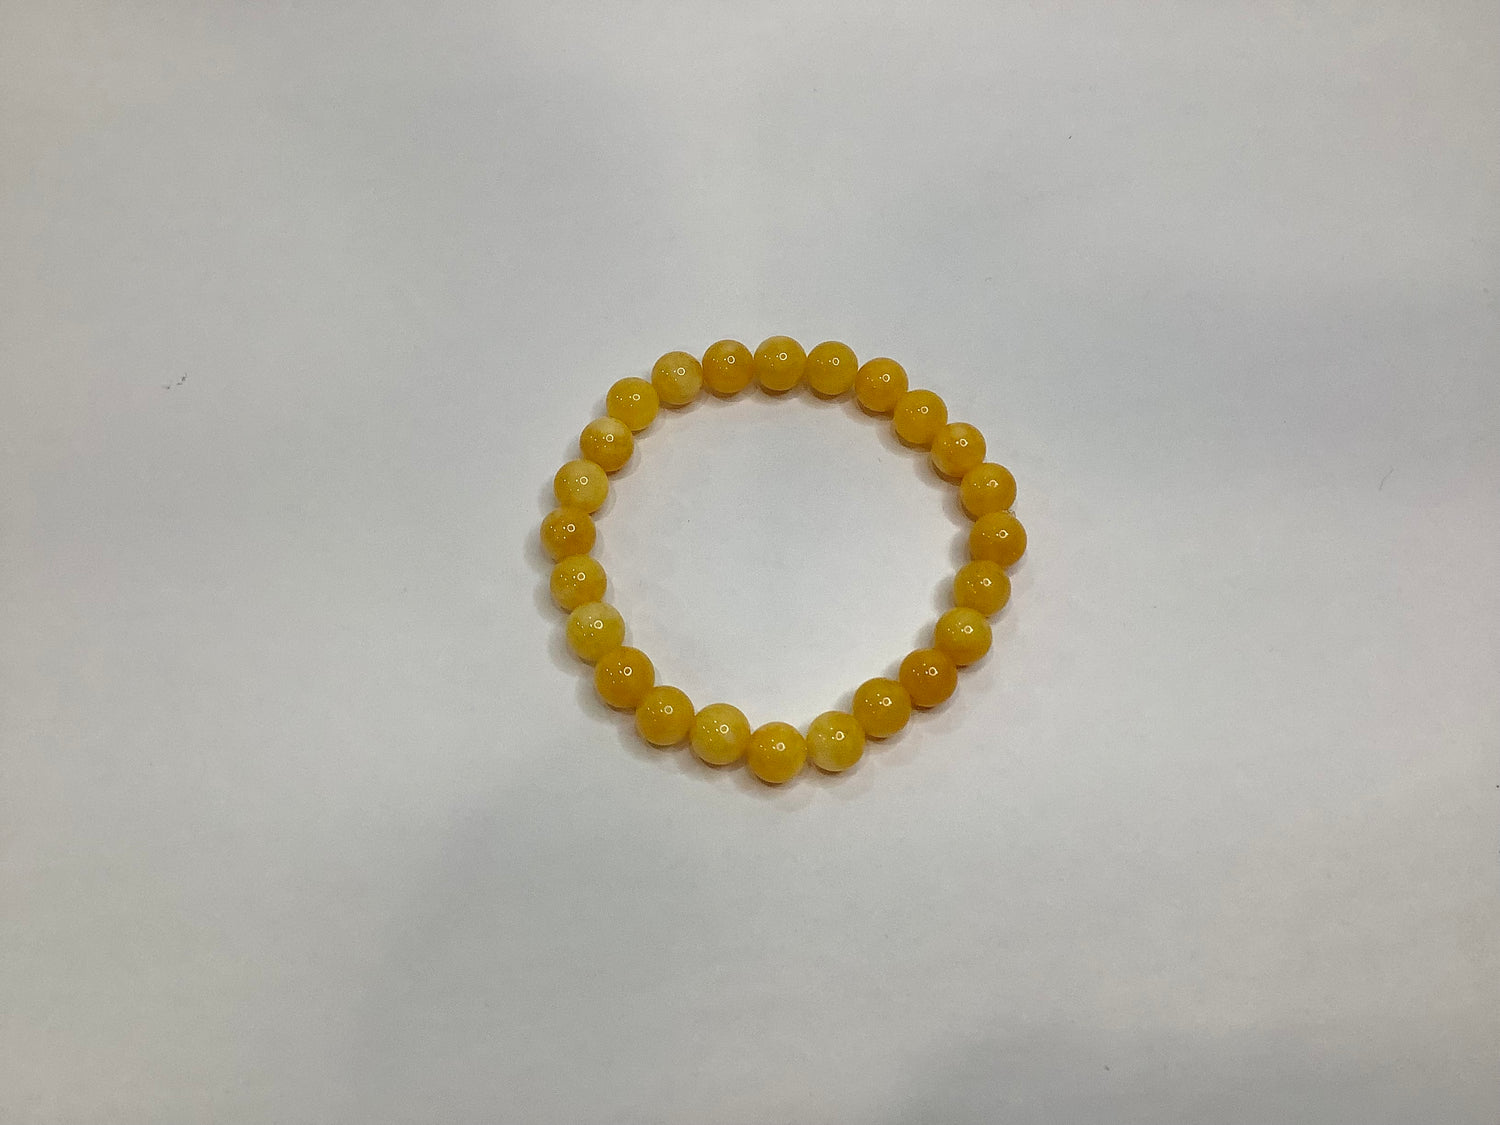 Amazon.co.jp: [M&Y] Natural Stone Power Stone Yellow Jade Bracelet 0.4 inch  (10 mm) Good Luck to Detect the Signs of Good Luck and Go on the Right  Path, Gemstone, yellow jade :